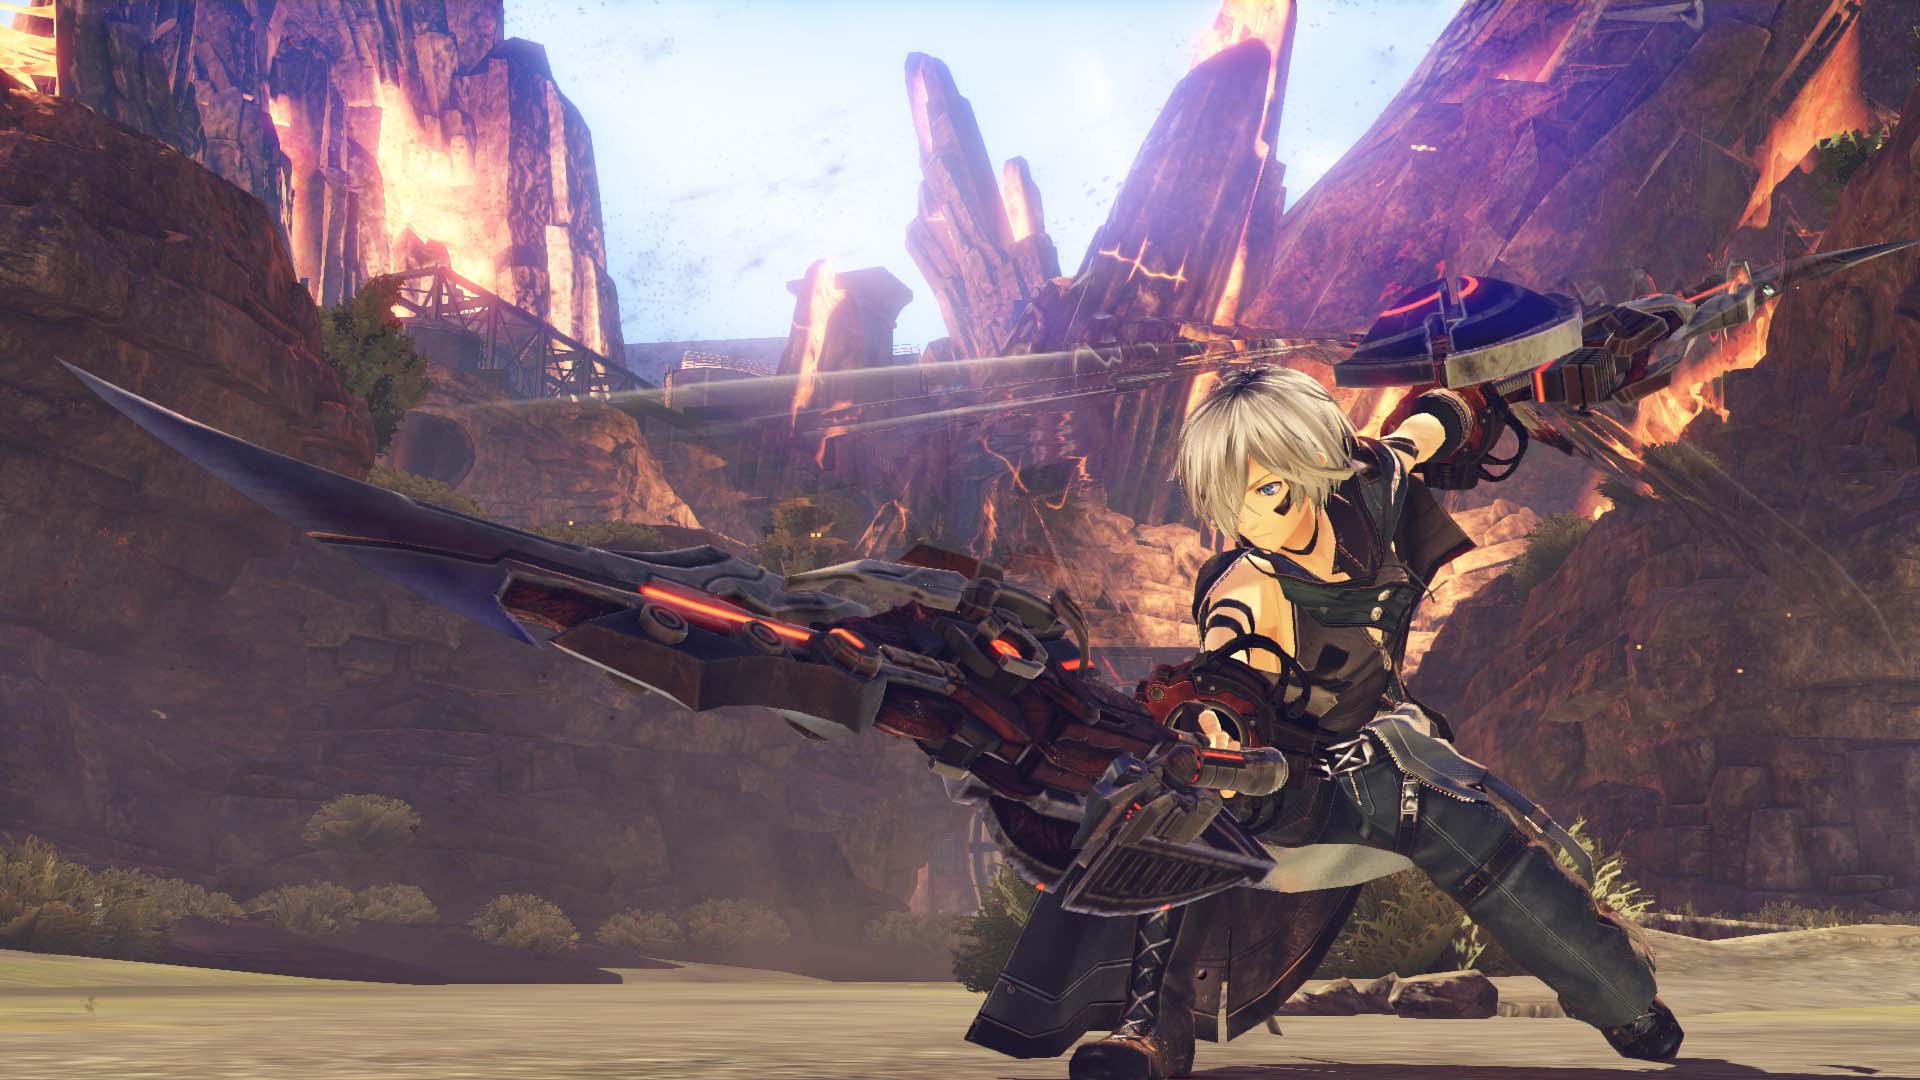 god eater 3 release date ps4